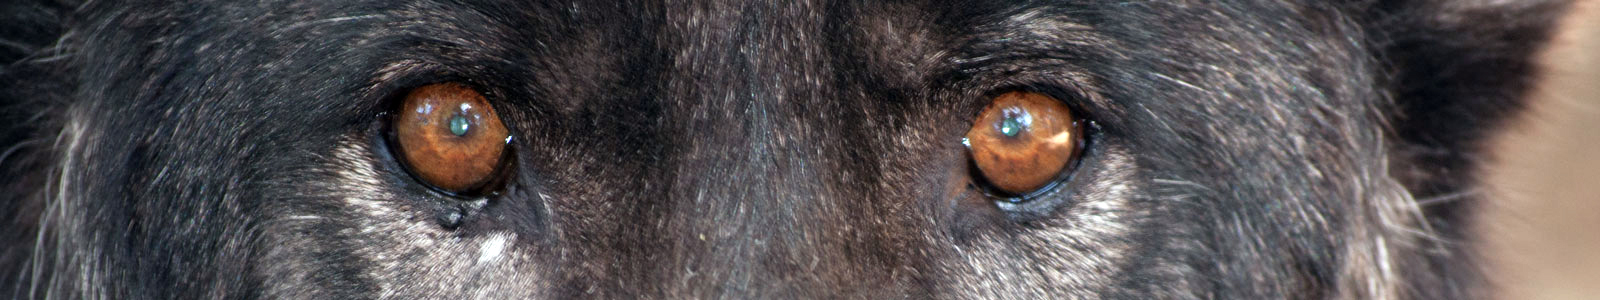 Texas Wolfdog Project Supporters Header Image